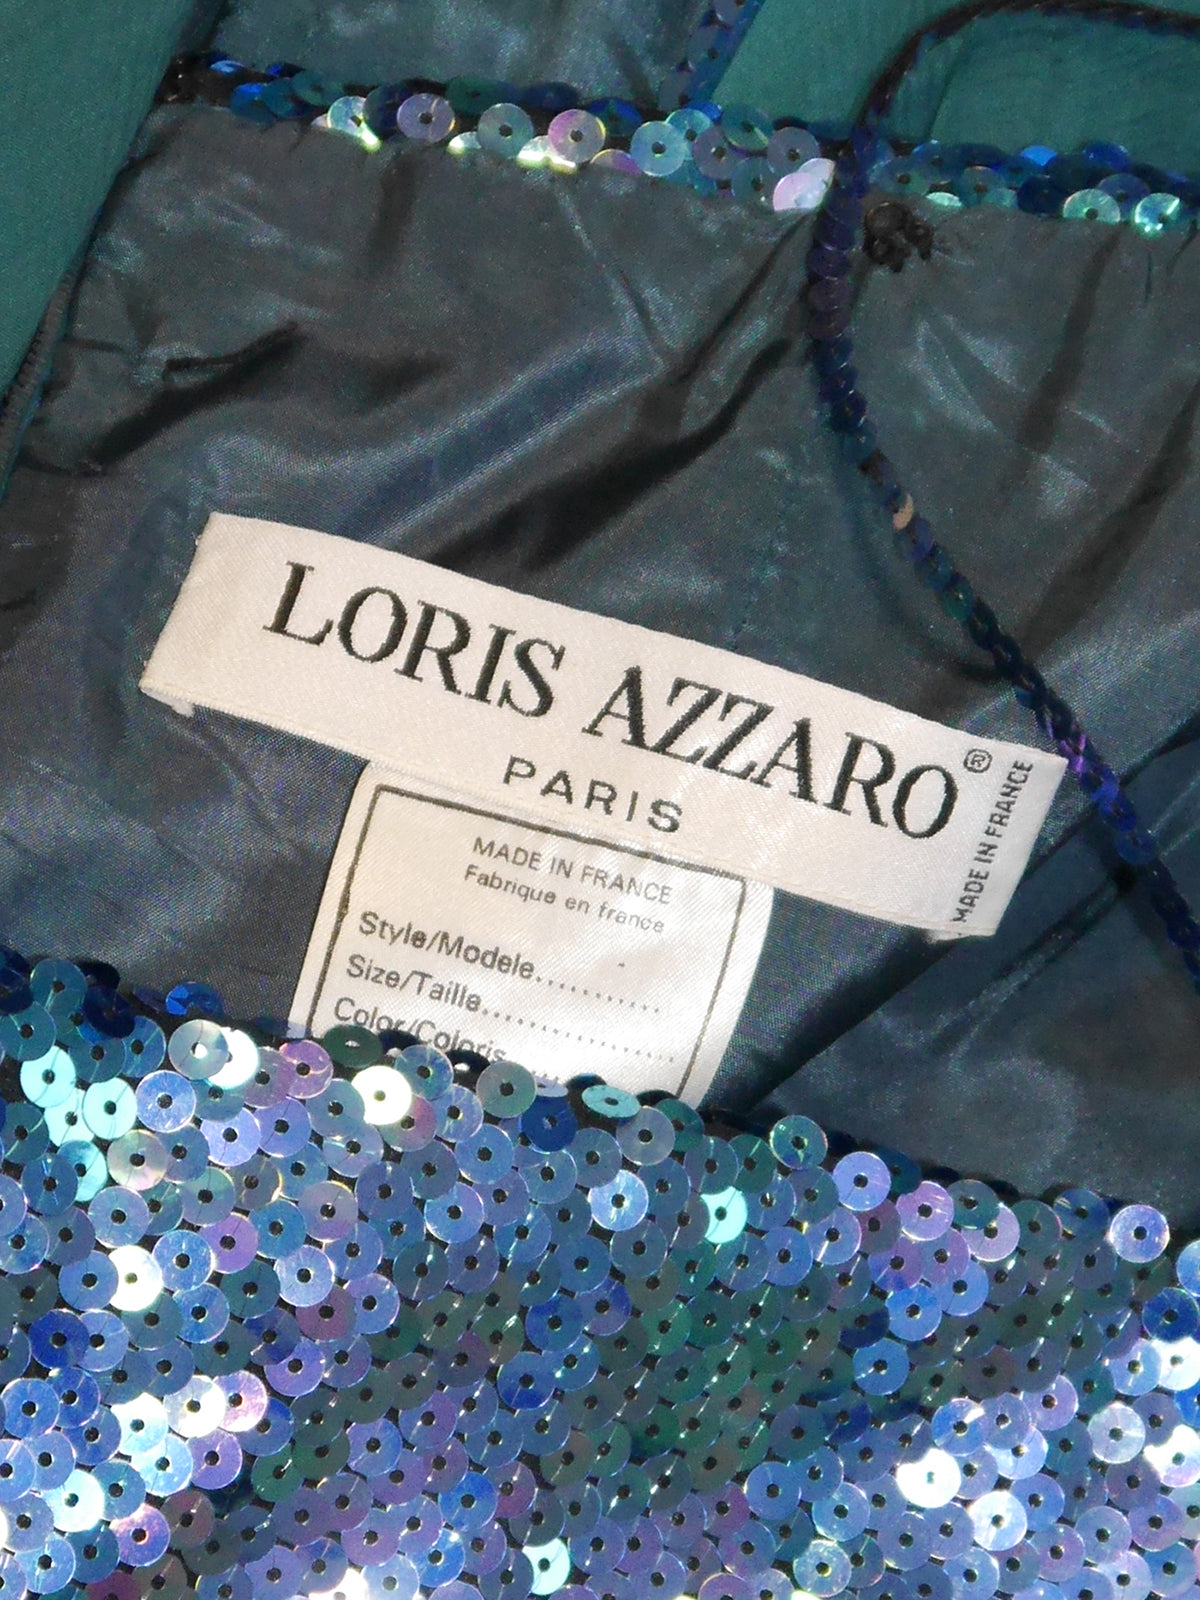 LORIS AZZARO Vintage Fully Sequined Evening Maxi Dress Gown w/ Cape